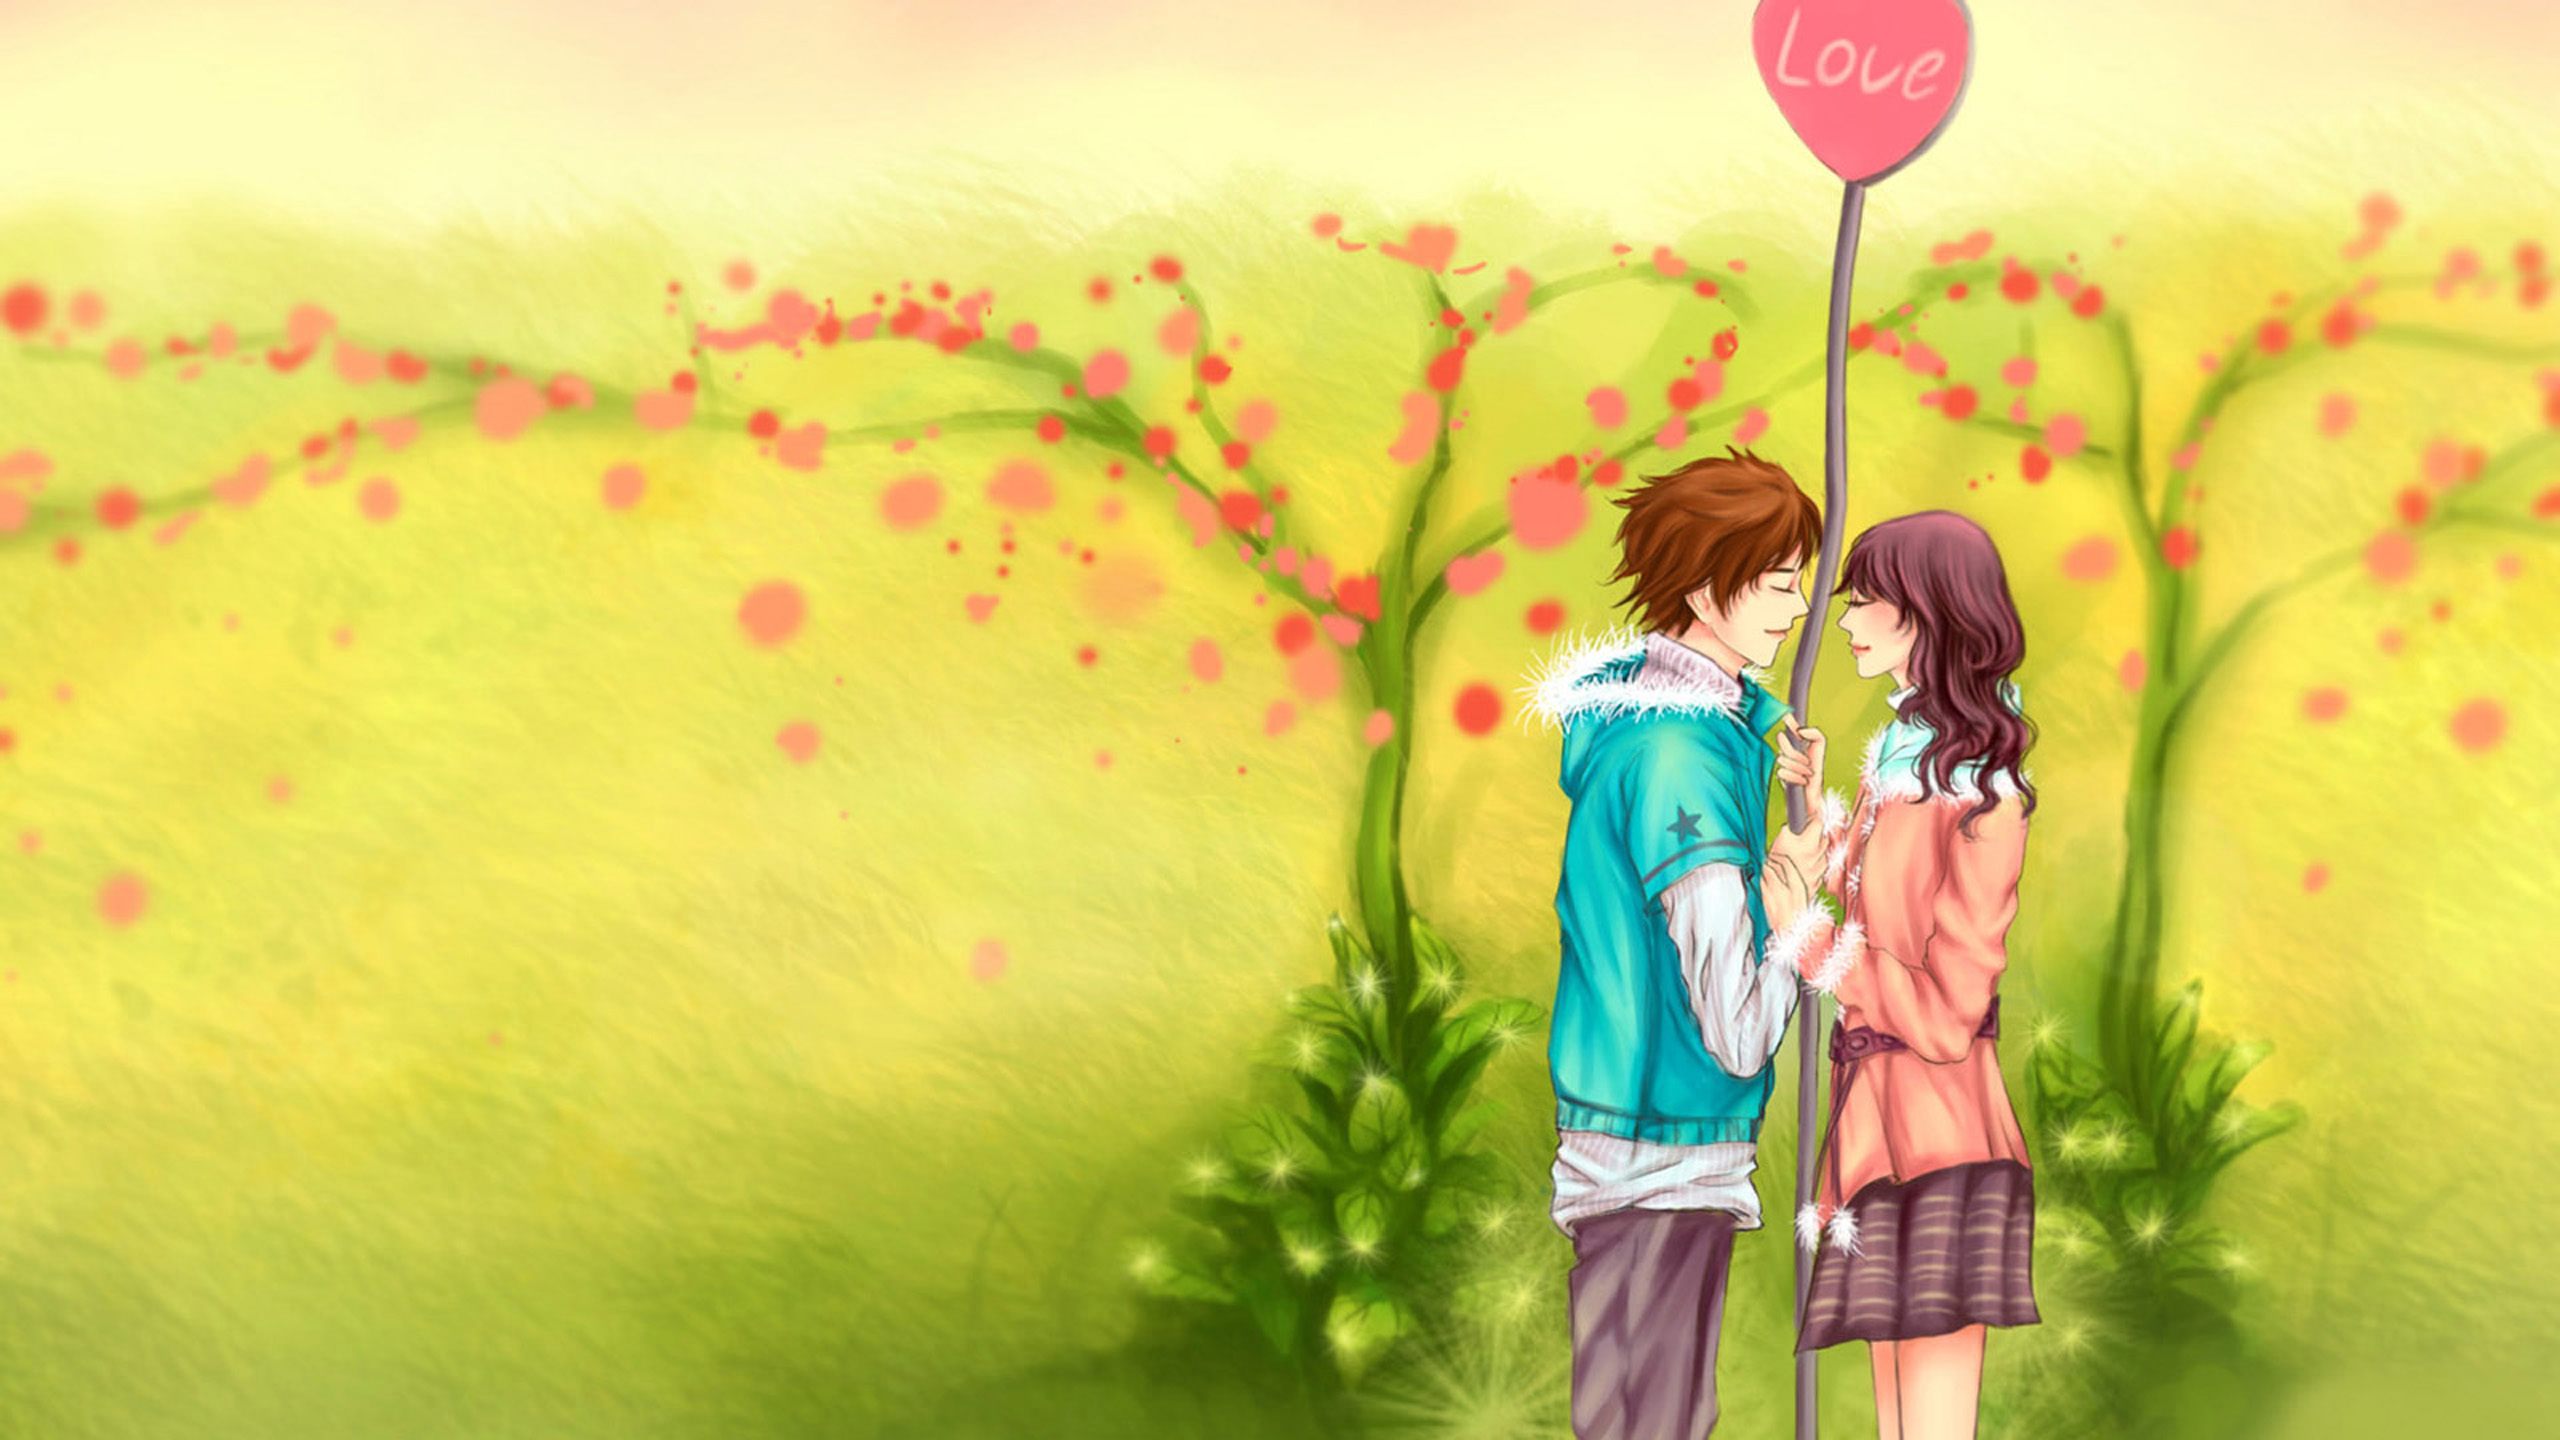 Cute Lovers Wallpaper HD Download Of Two Lovers